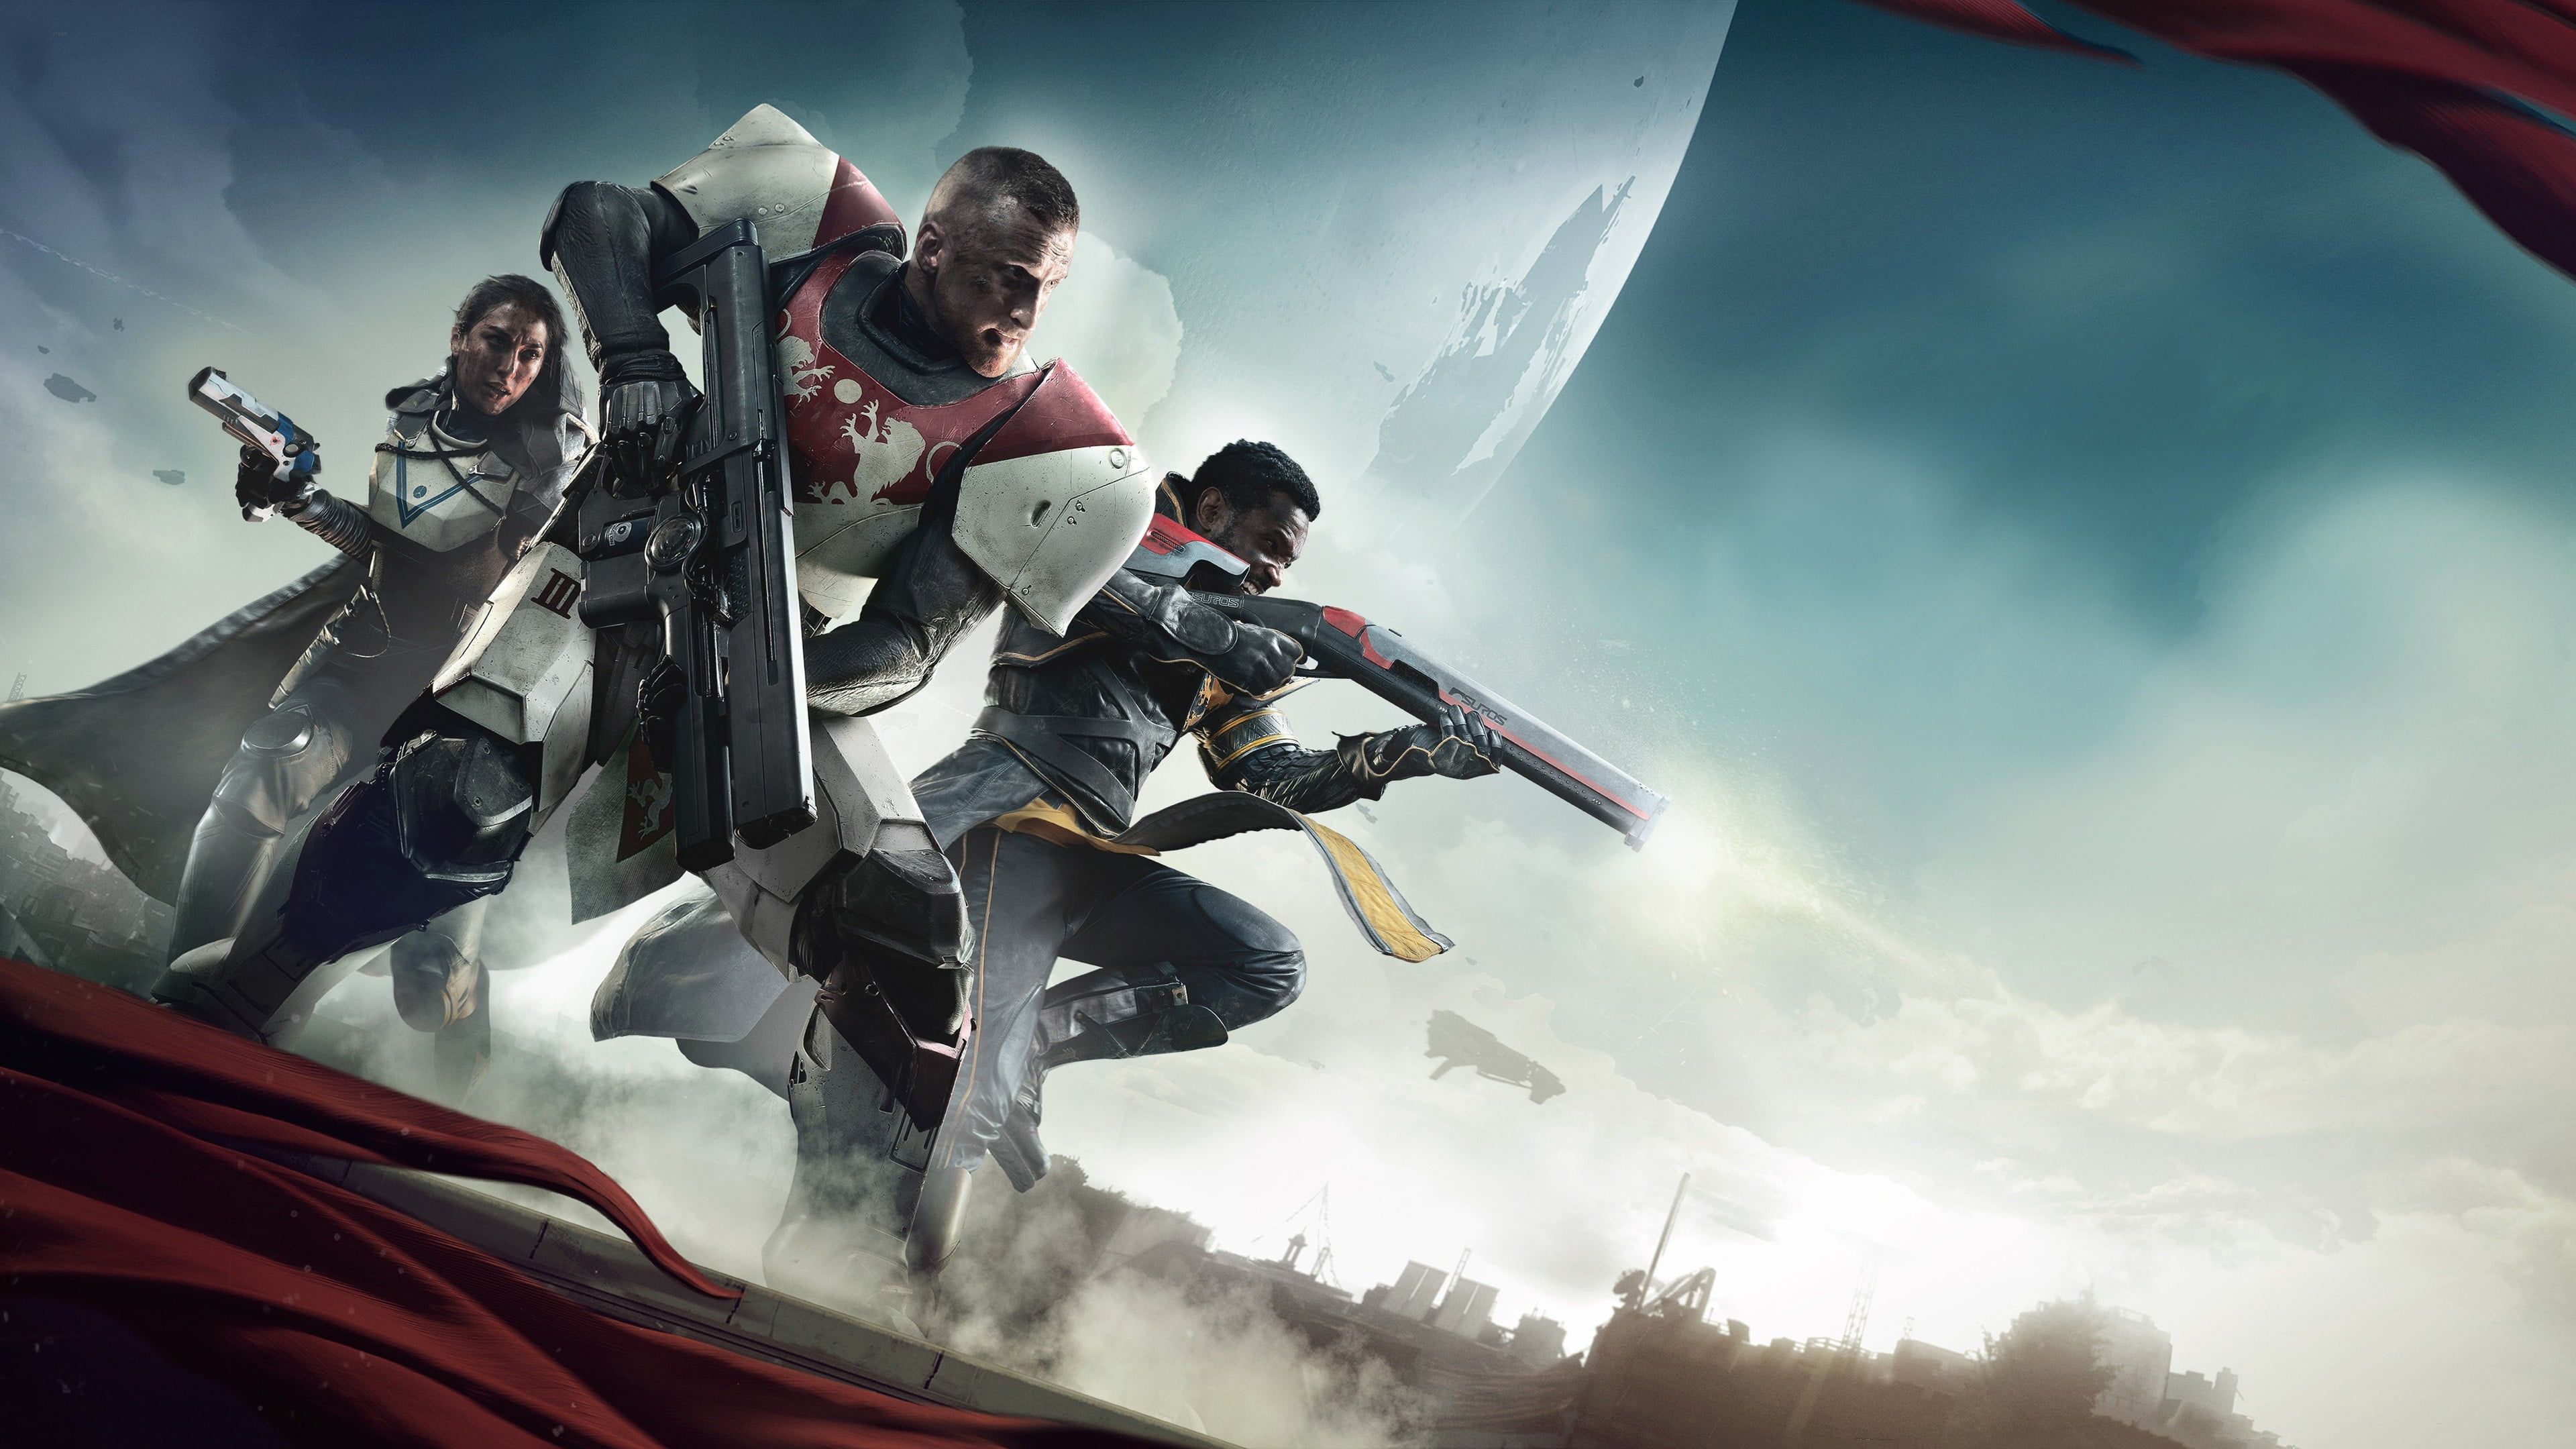 Videogame poster, Destiny 2 (video game), video games, science